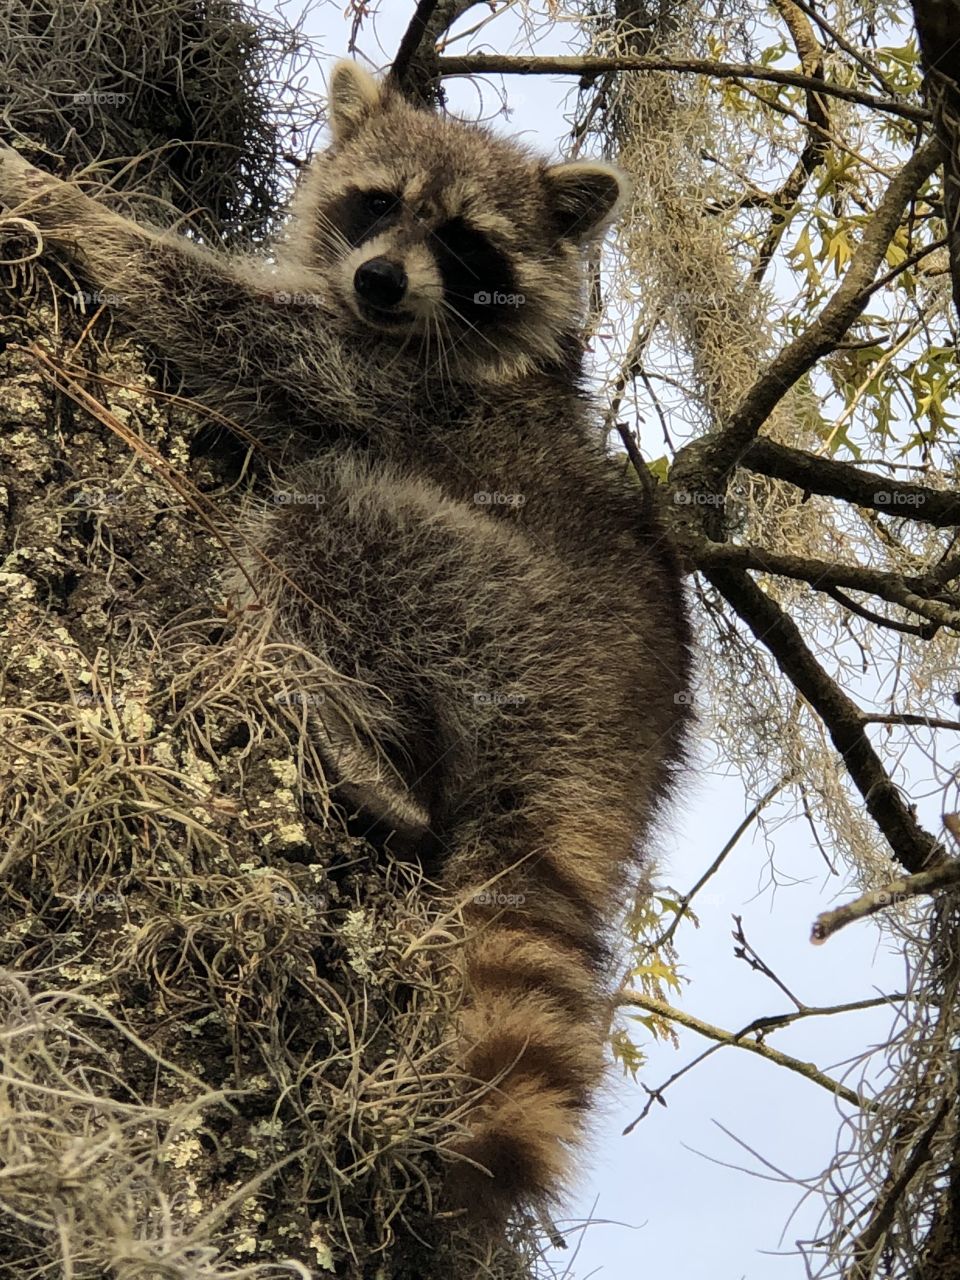 Raccoon climbing a tree in our back yard perfect pic